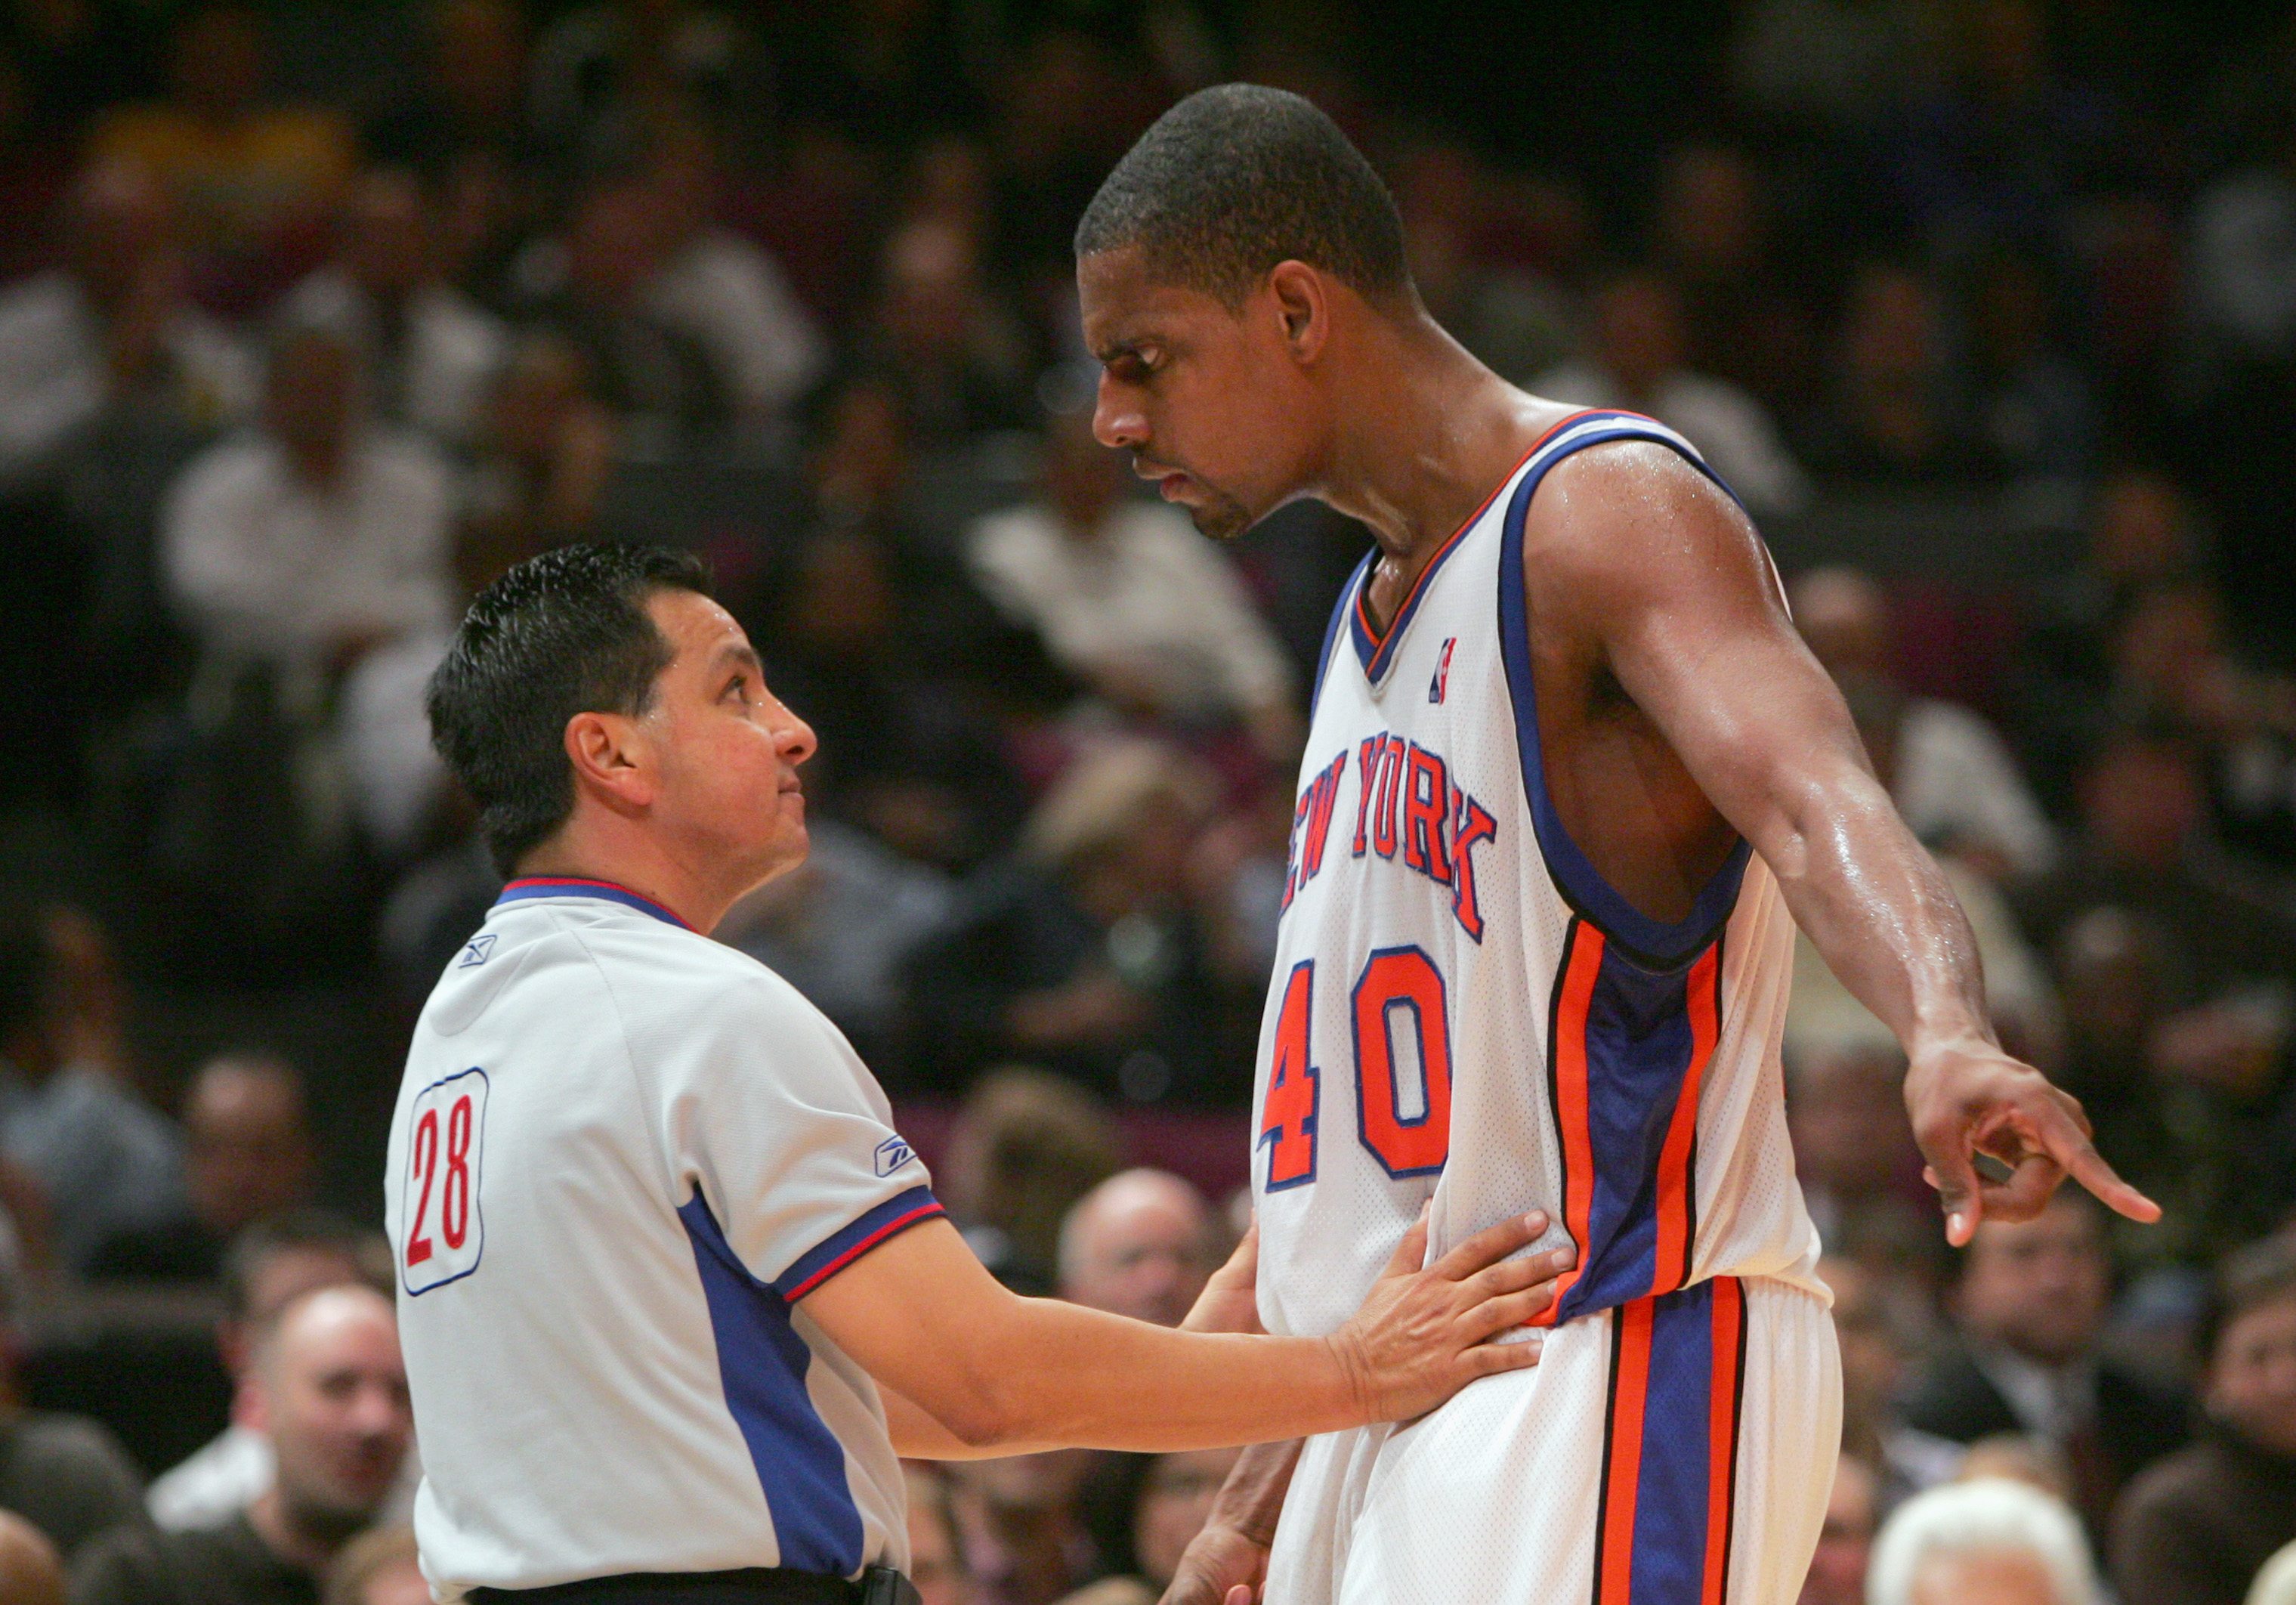 10 NBA Players Most Known for Playing ‘Dirty’